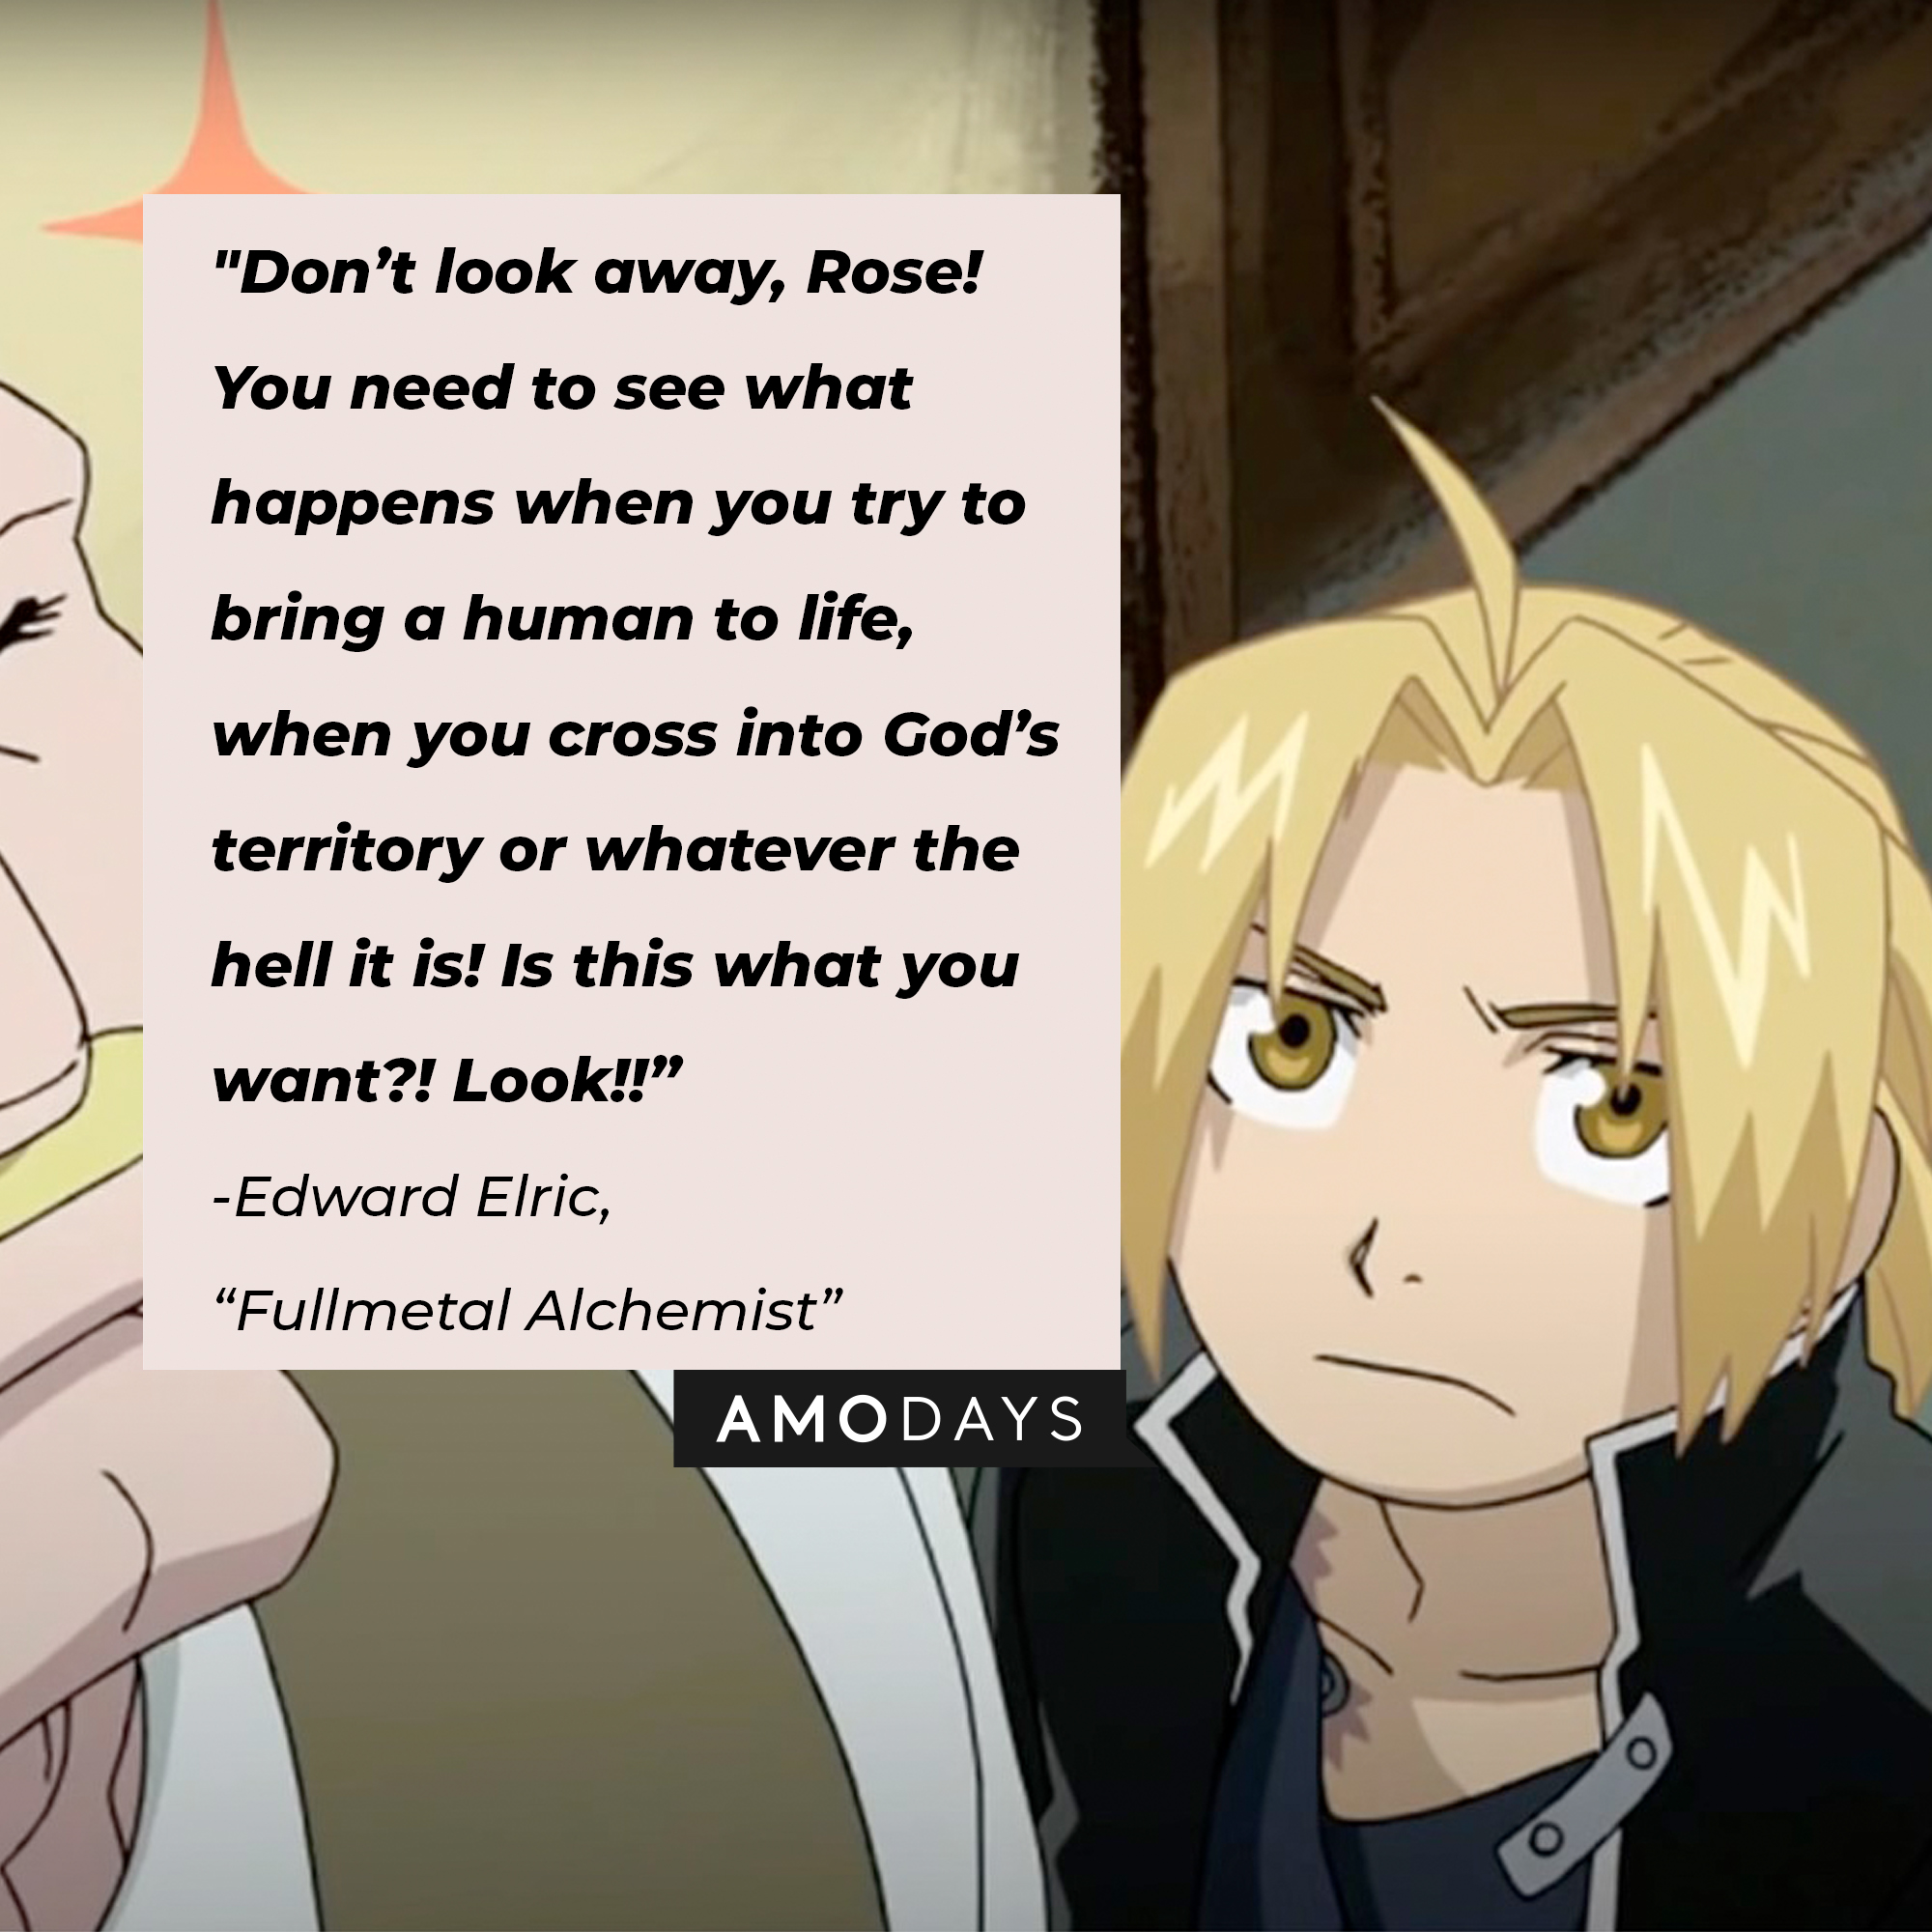 Edward Elric's quote: "Don’t look away, Rose! You need to see what happens when you try to bring a human to life, when you cross into God’s territory or whatever the hell it is! Is this what you want?! Look!!” | Image: facebook.com/FMAHiromuArakawa